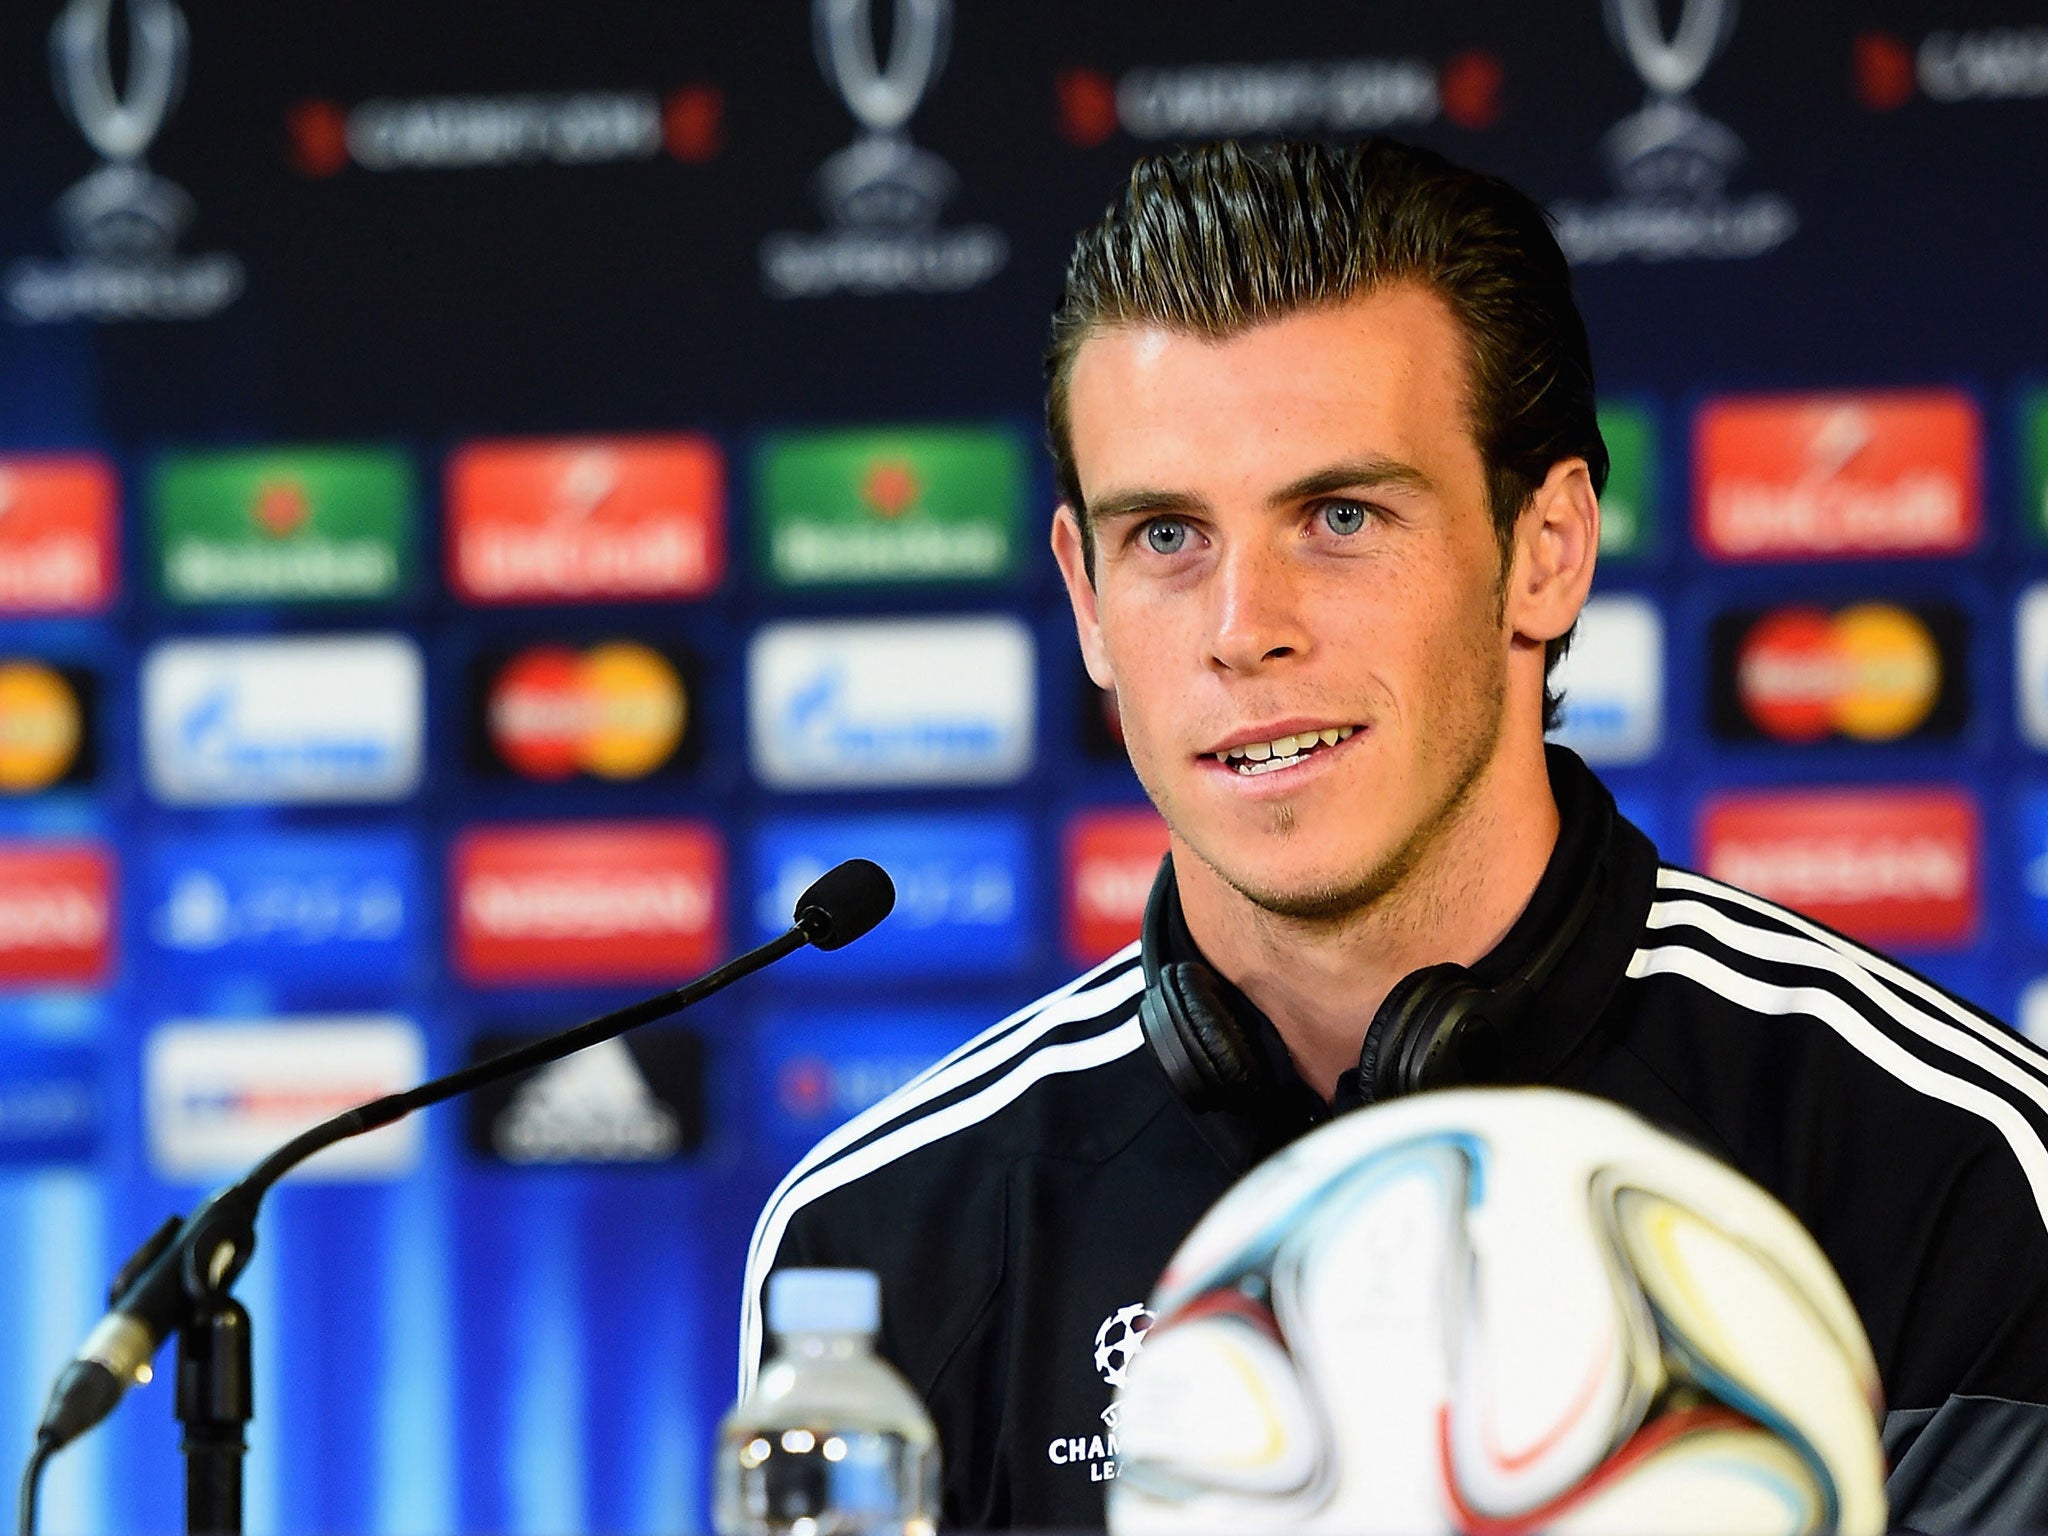 Gareth Bale is set to be the fan-favourite when the Uefa Super Cup takes place in Cardiff